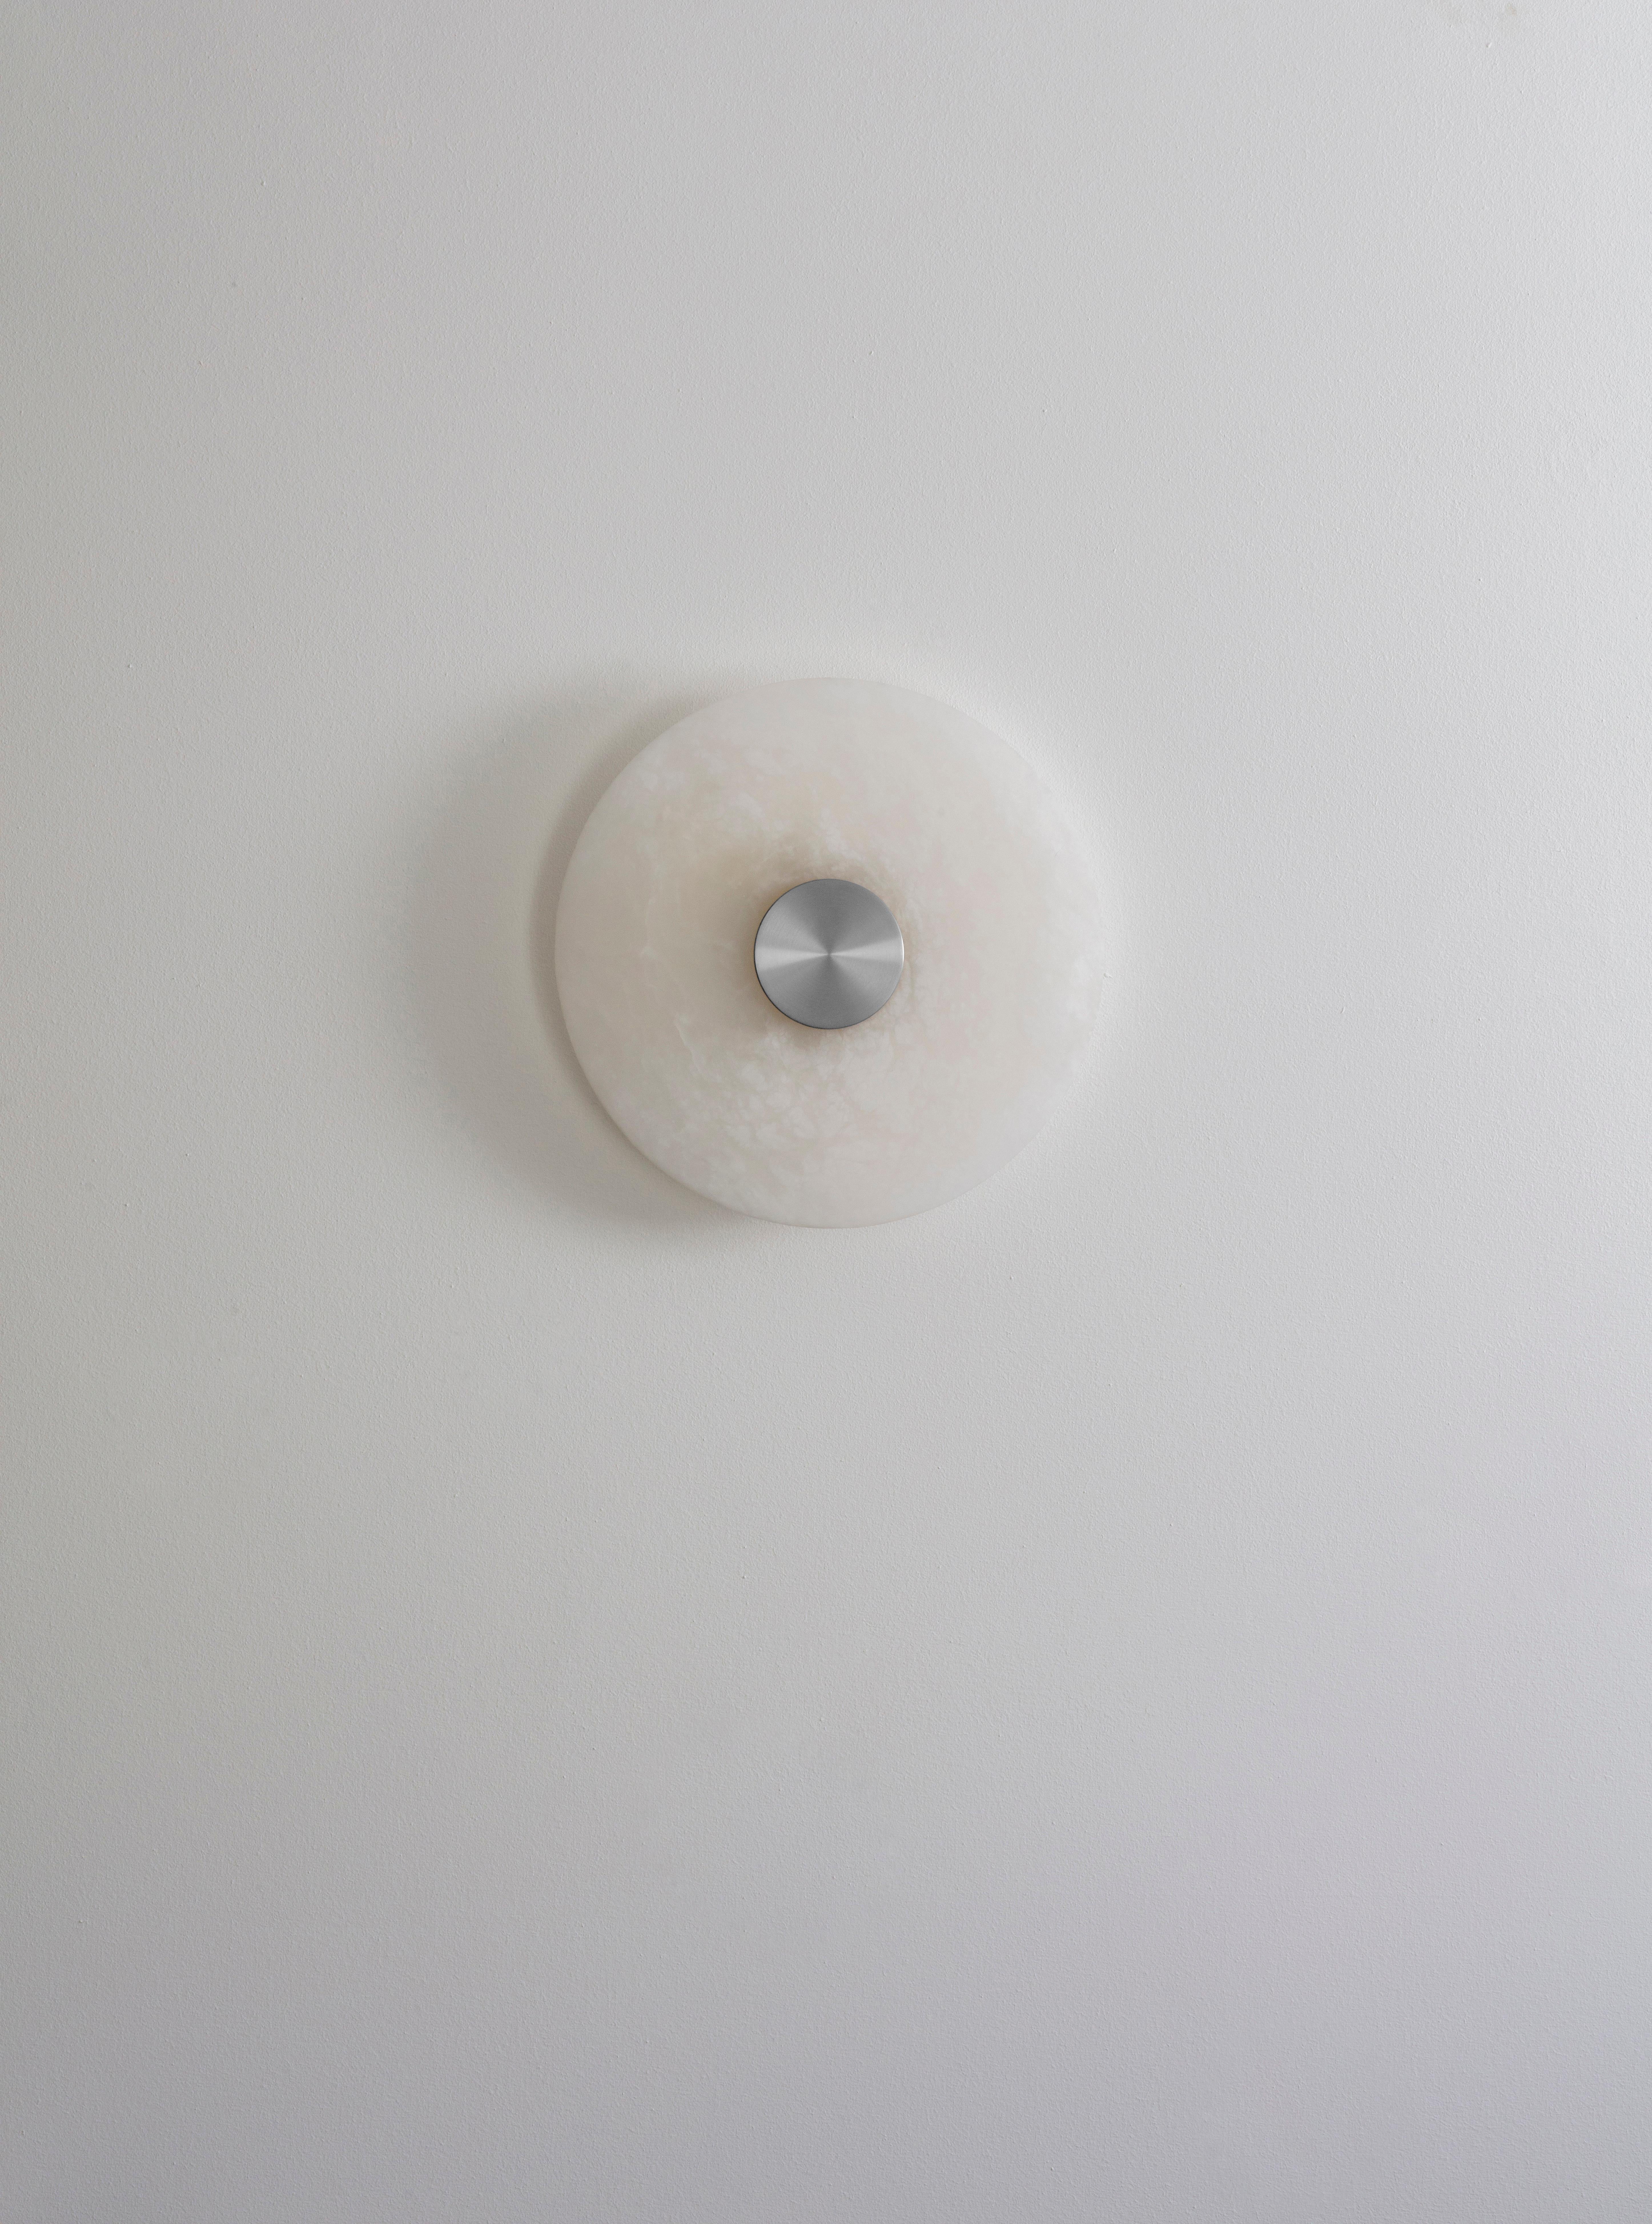 Bide large wall light Nickel by Bert Frank
Dimensions: D 28 x H 6 cm
Materials: Nickel, Alabaster

All our lamps can be wired according to each country. If sold to the USA it will be wired for the USA for instance.

When Adam Yeats and Robbie